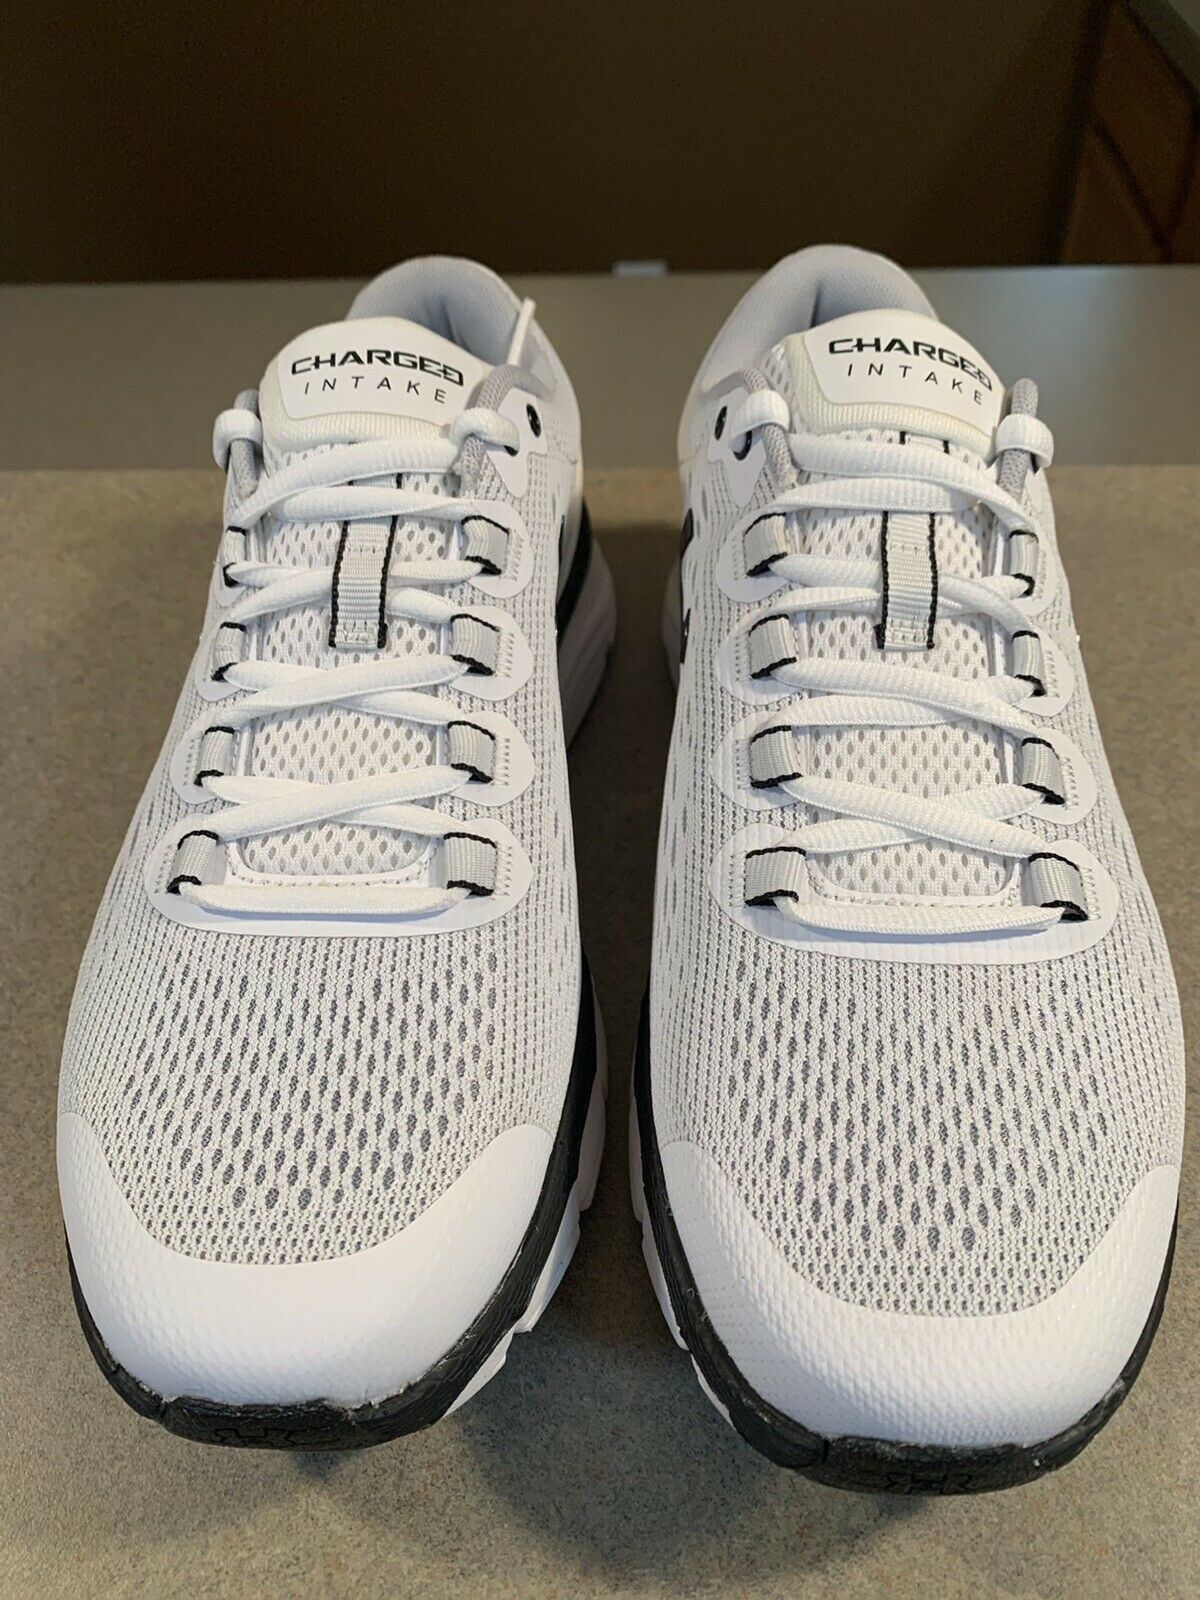 Under Armor Charged Intake 4 Mens Shoes Size 8